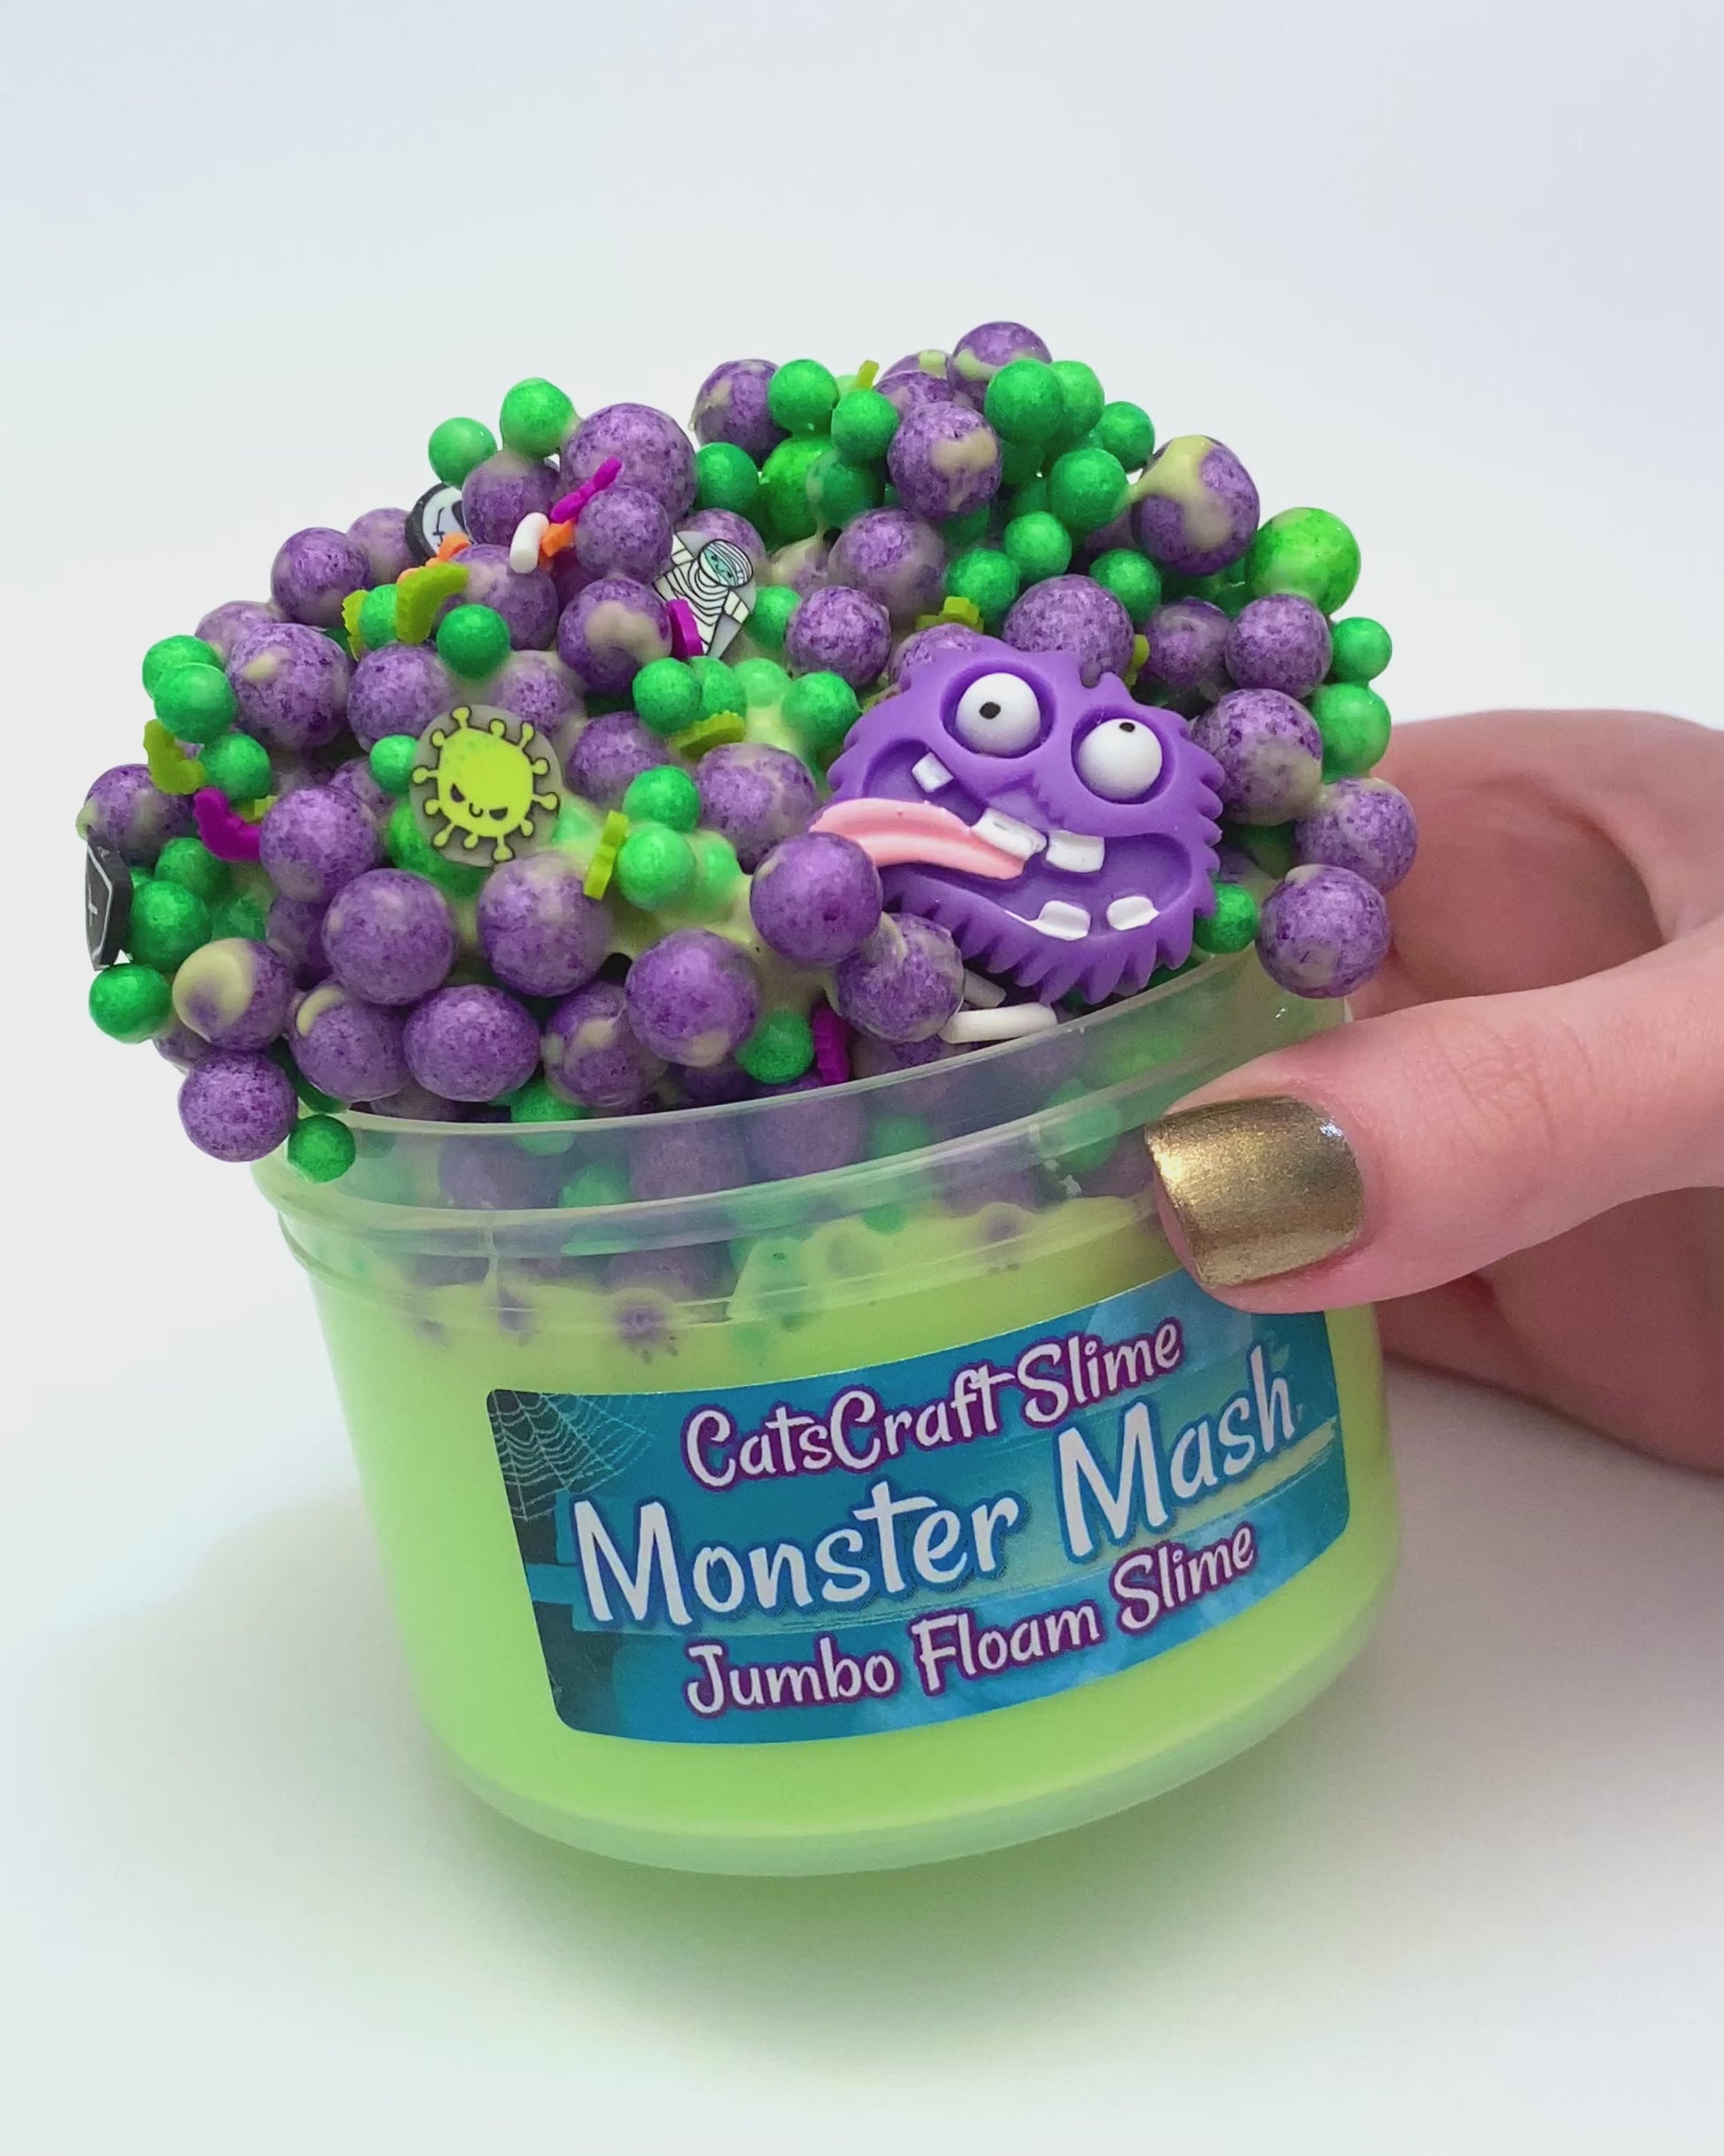 Purple Crunchy Floam Slime (Scented) - Slime - Crunchy Slime - Floam -  Floam Slime - Purple Slime - Scented Slime